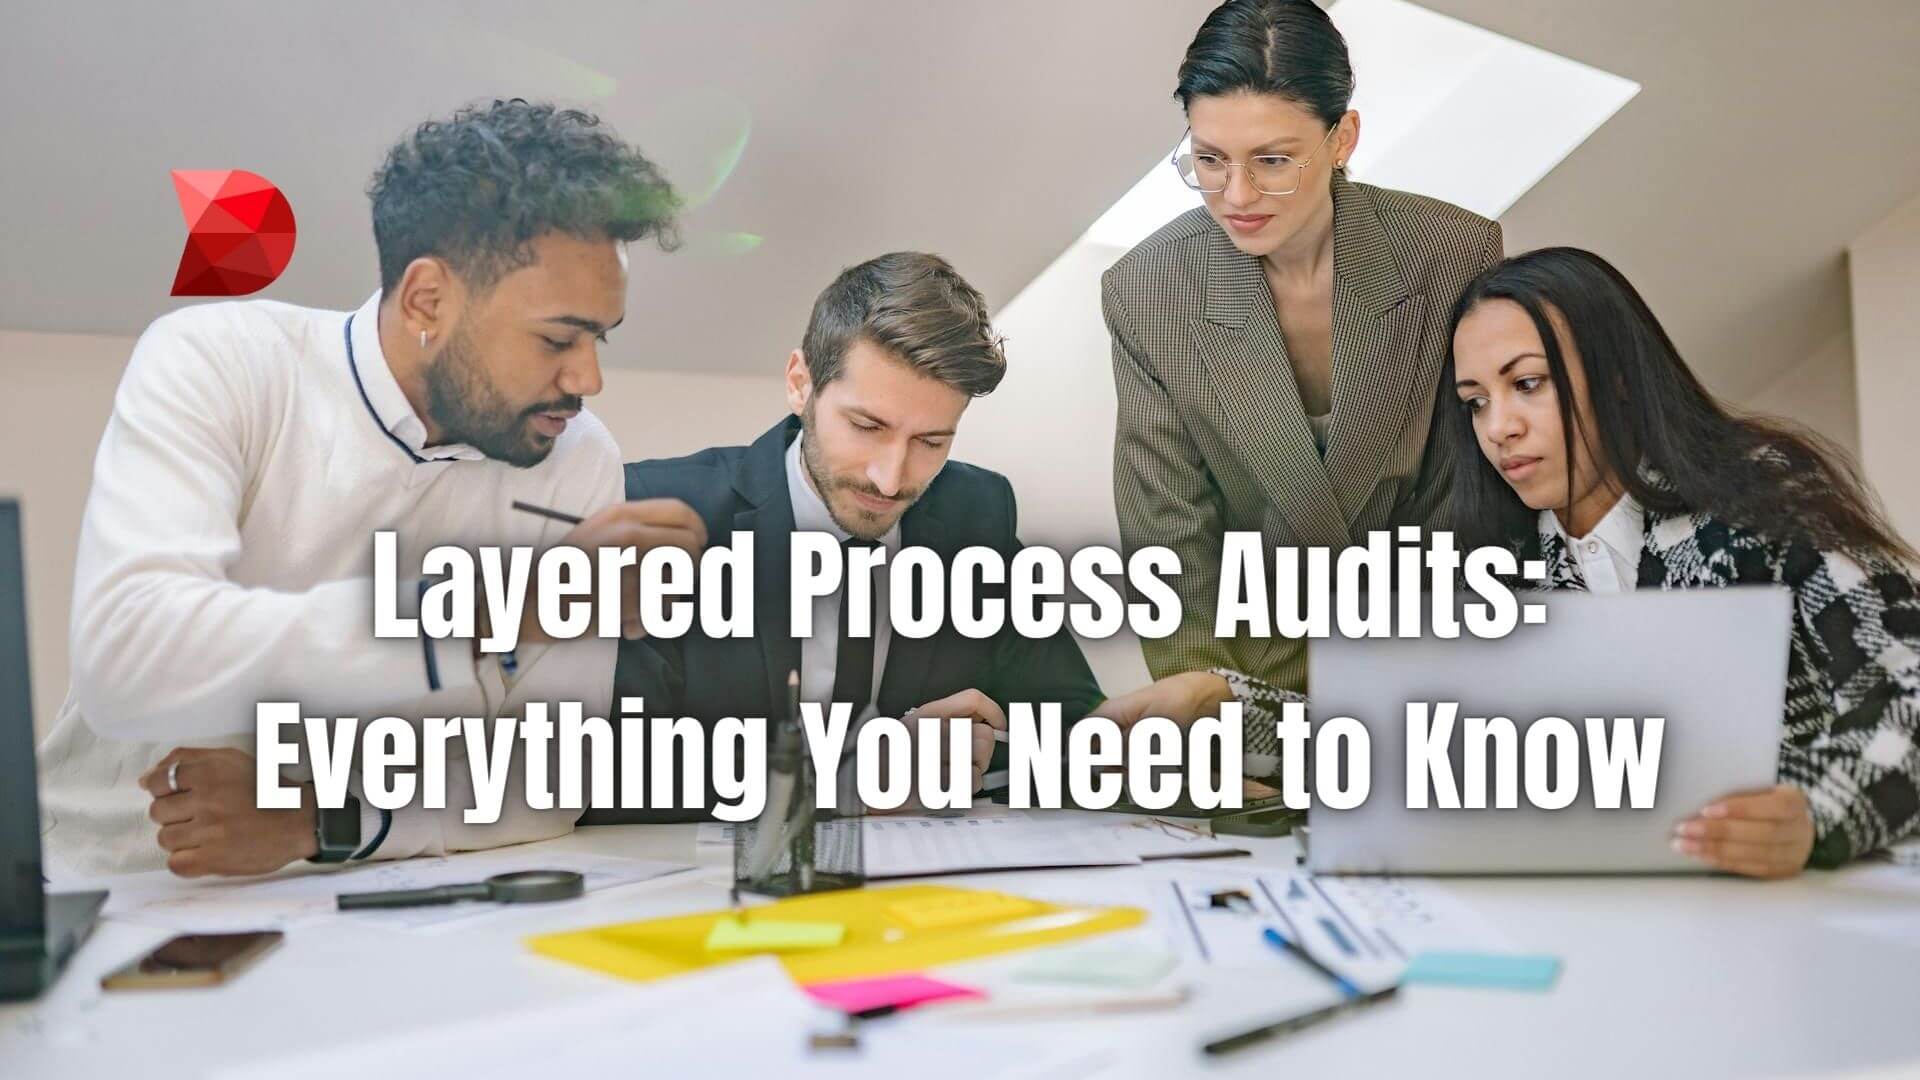 Unlock the power of Layered Process Audits with our full guide. Learn key insights, best practices, and implementation strategies today!